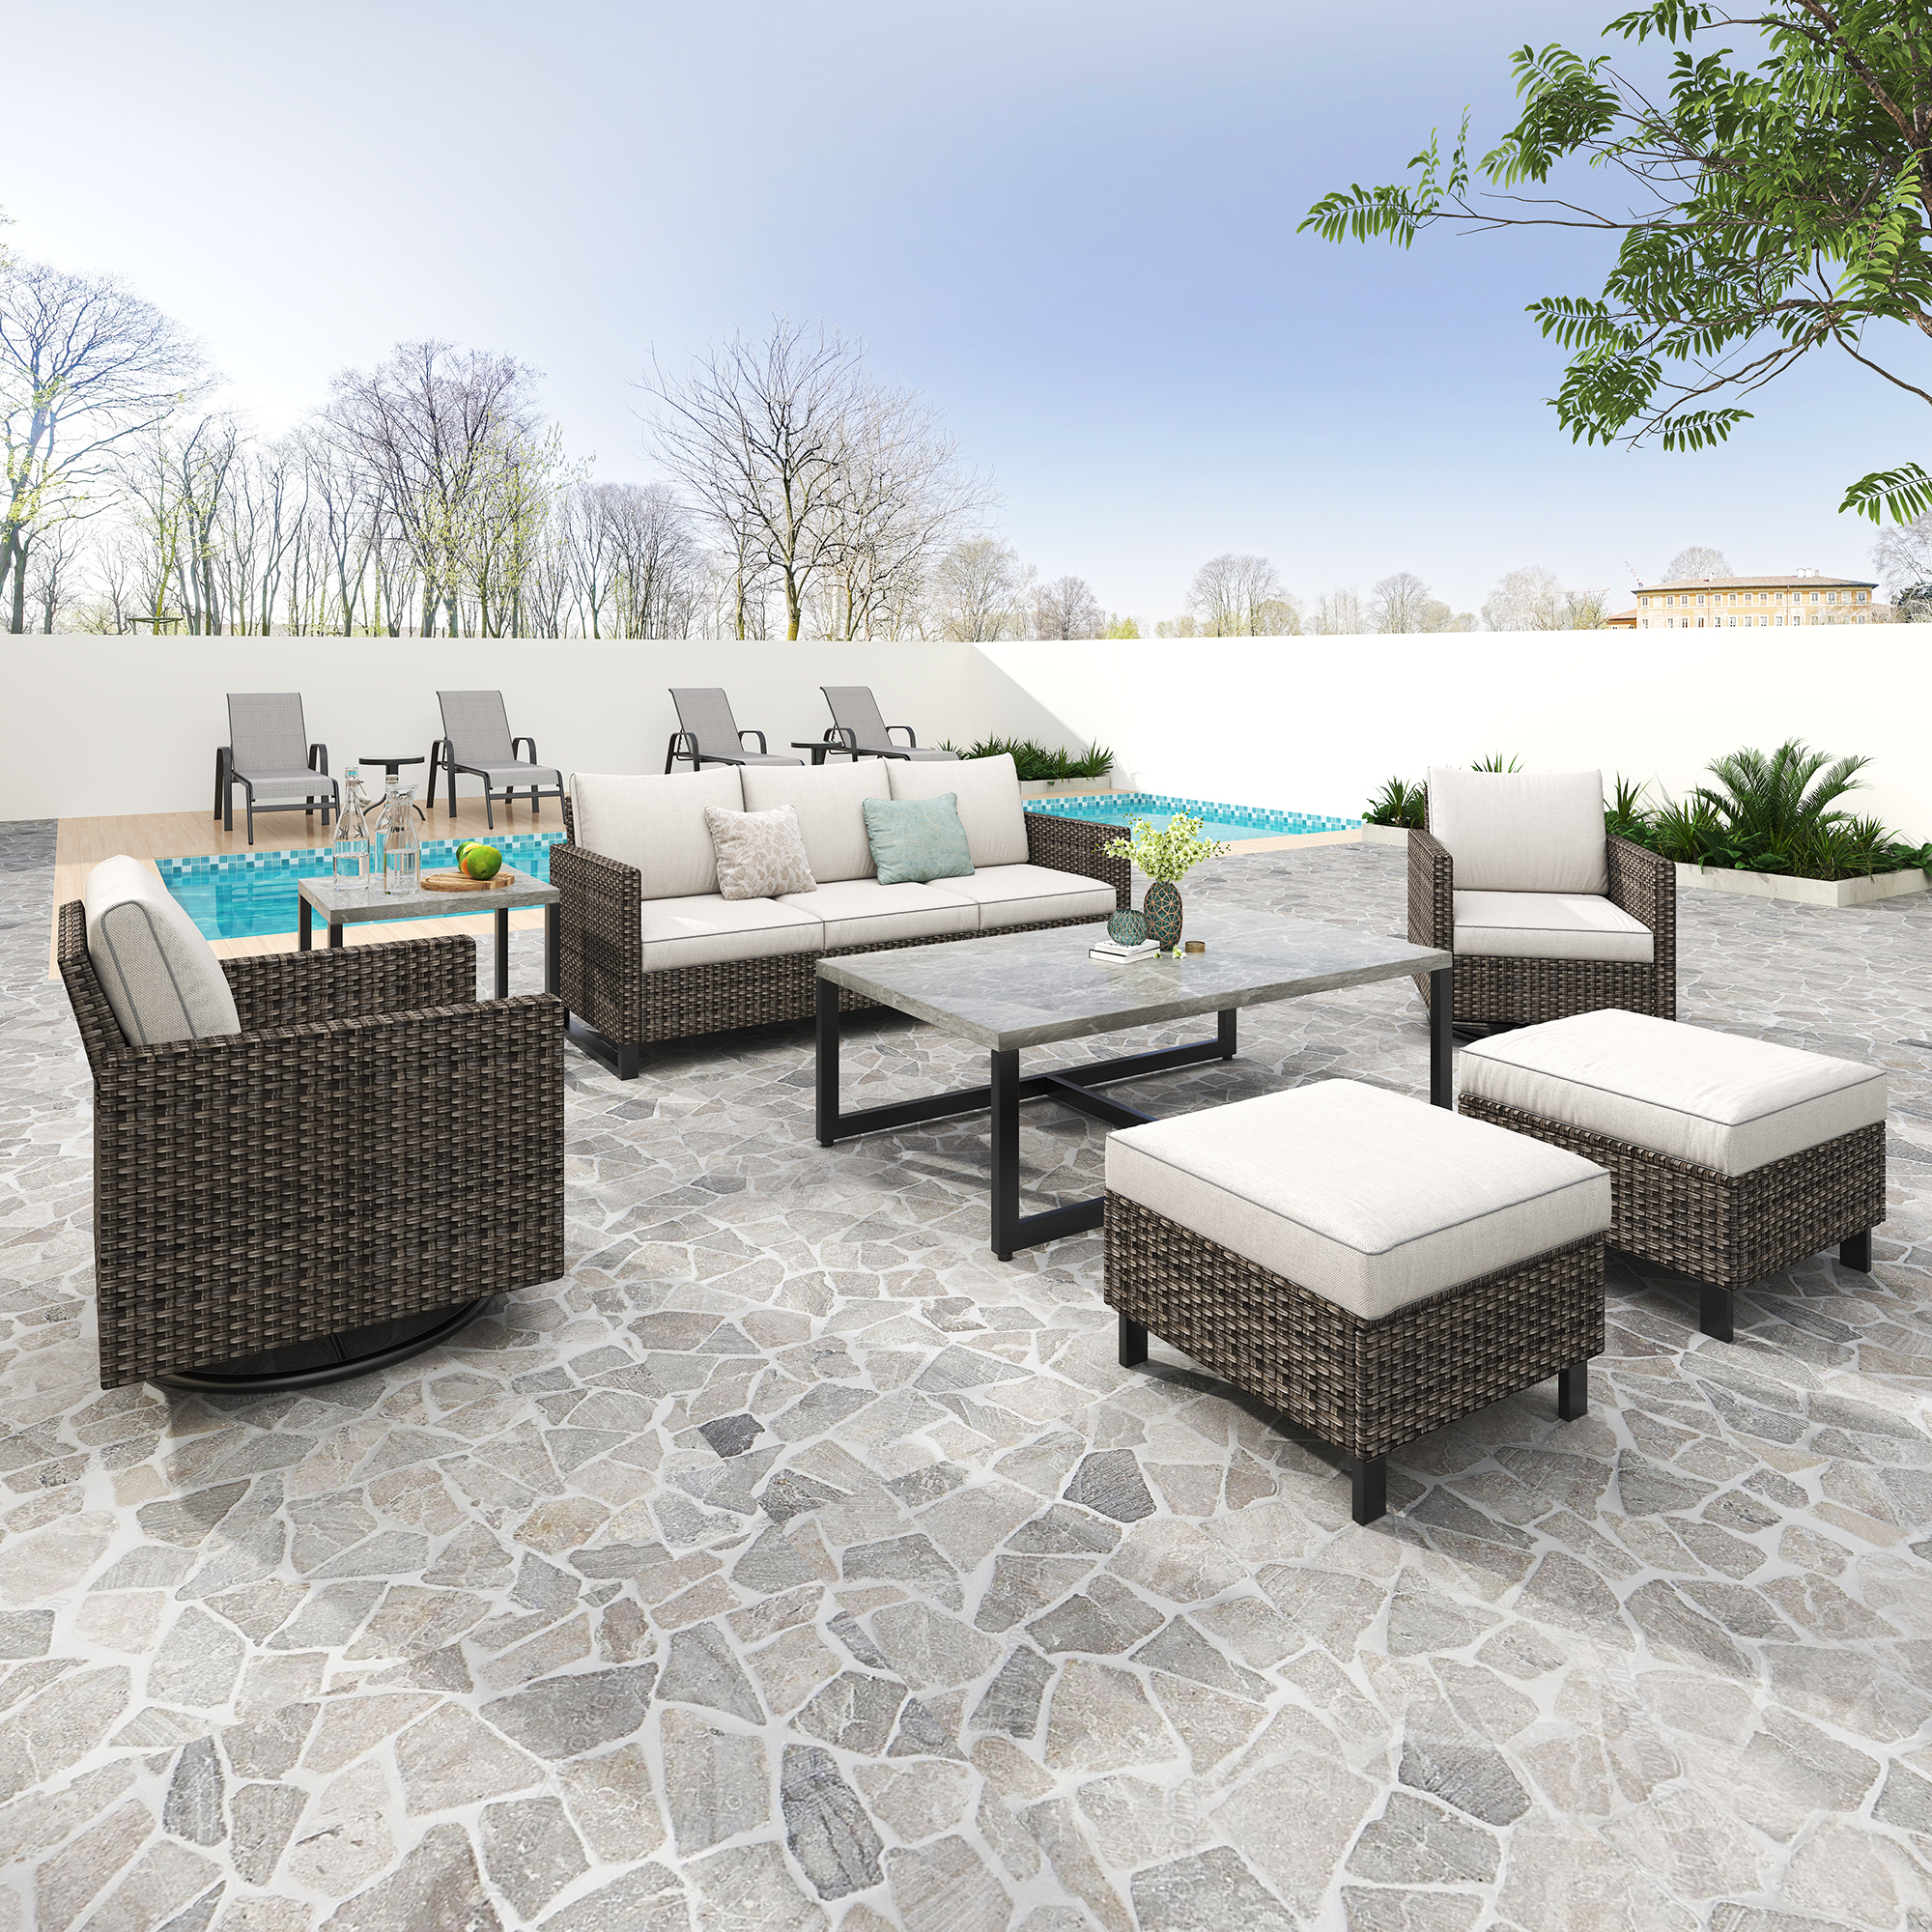 Digital marketing leads the outdoor furniture industry！